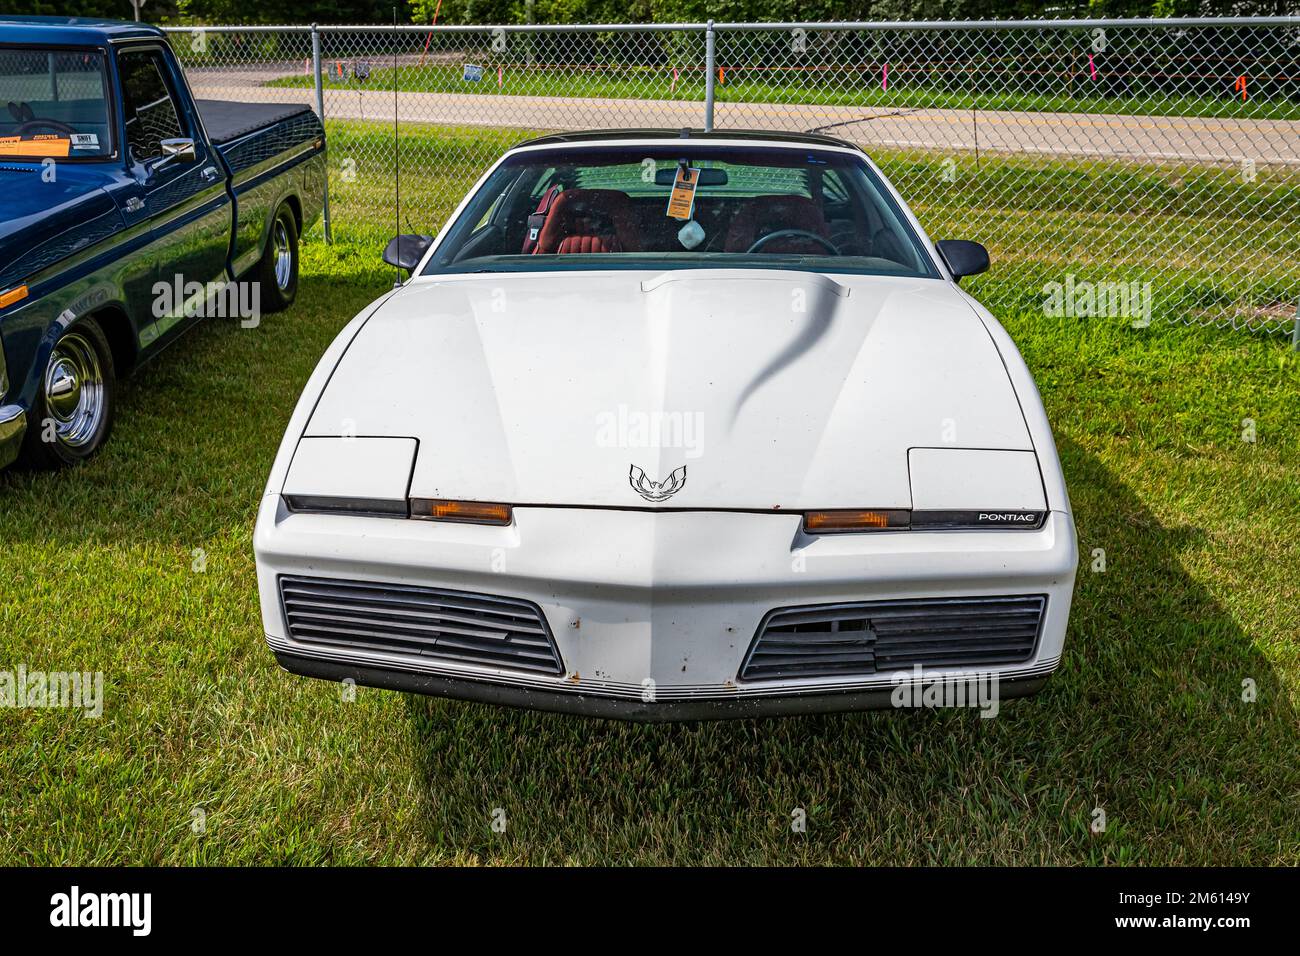 Iola, WI - July 07, 2022: High perspective front view of a 1984 Pontiac Firebird Trans Am at a local car show. Stock Photo